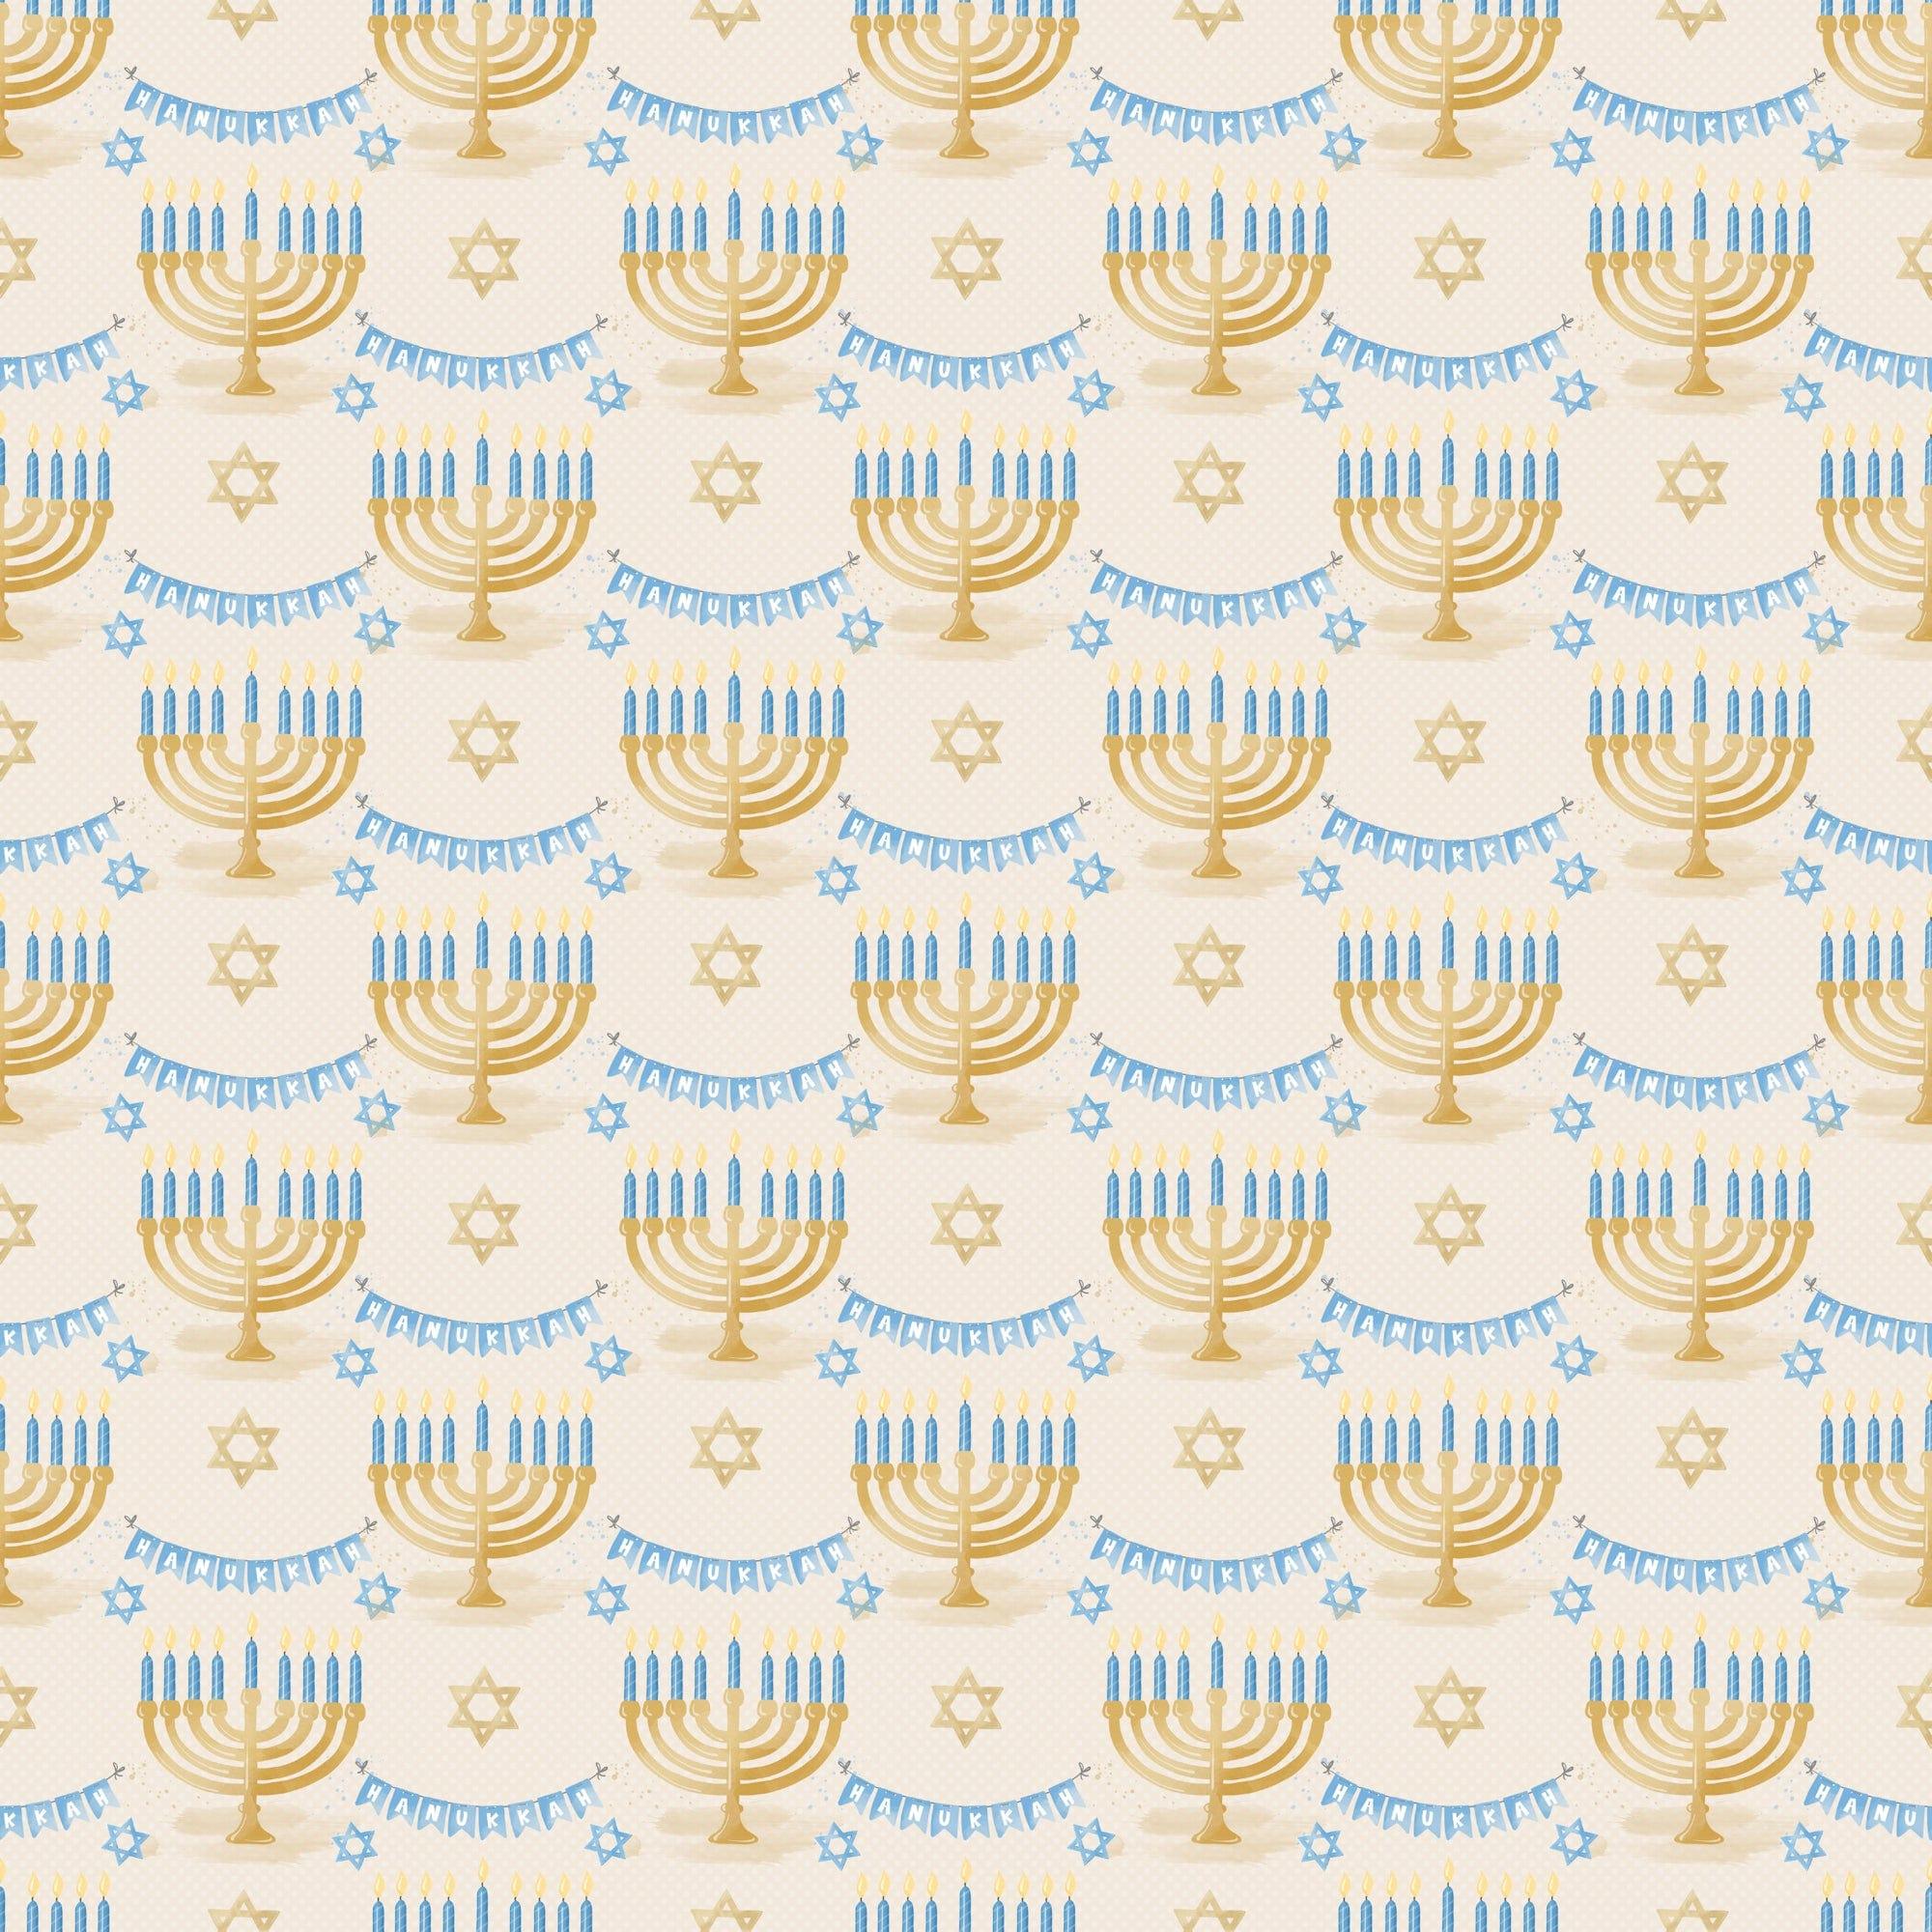 Hanukkah Collection Shine Bright 12 x 12 Double-Sided Scrapbook Paper by SSC Designs - Scrapbook Supply Companies